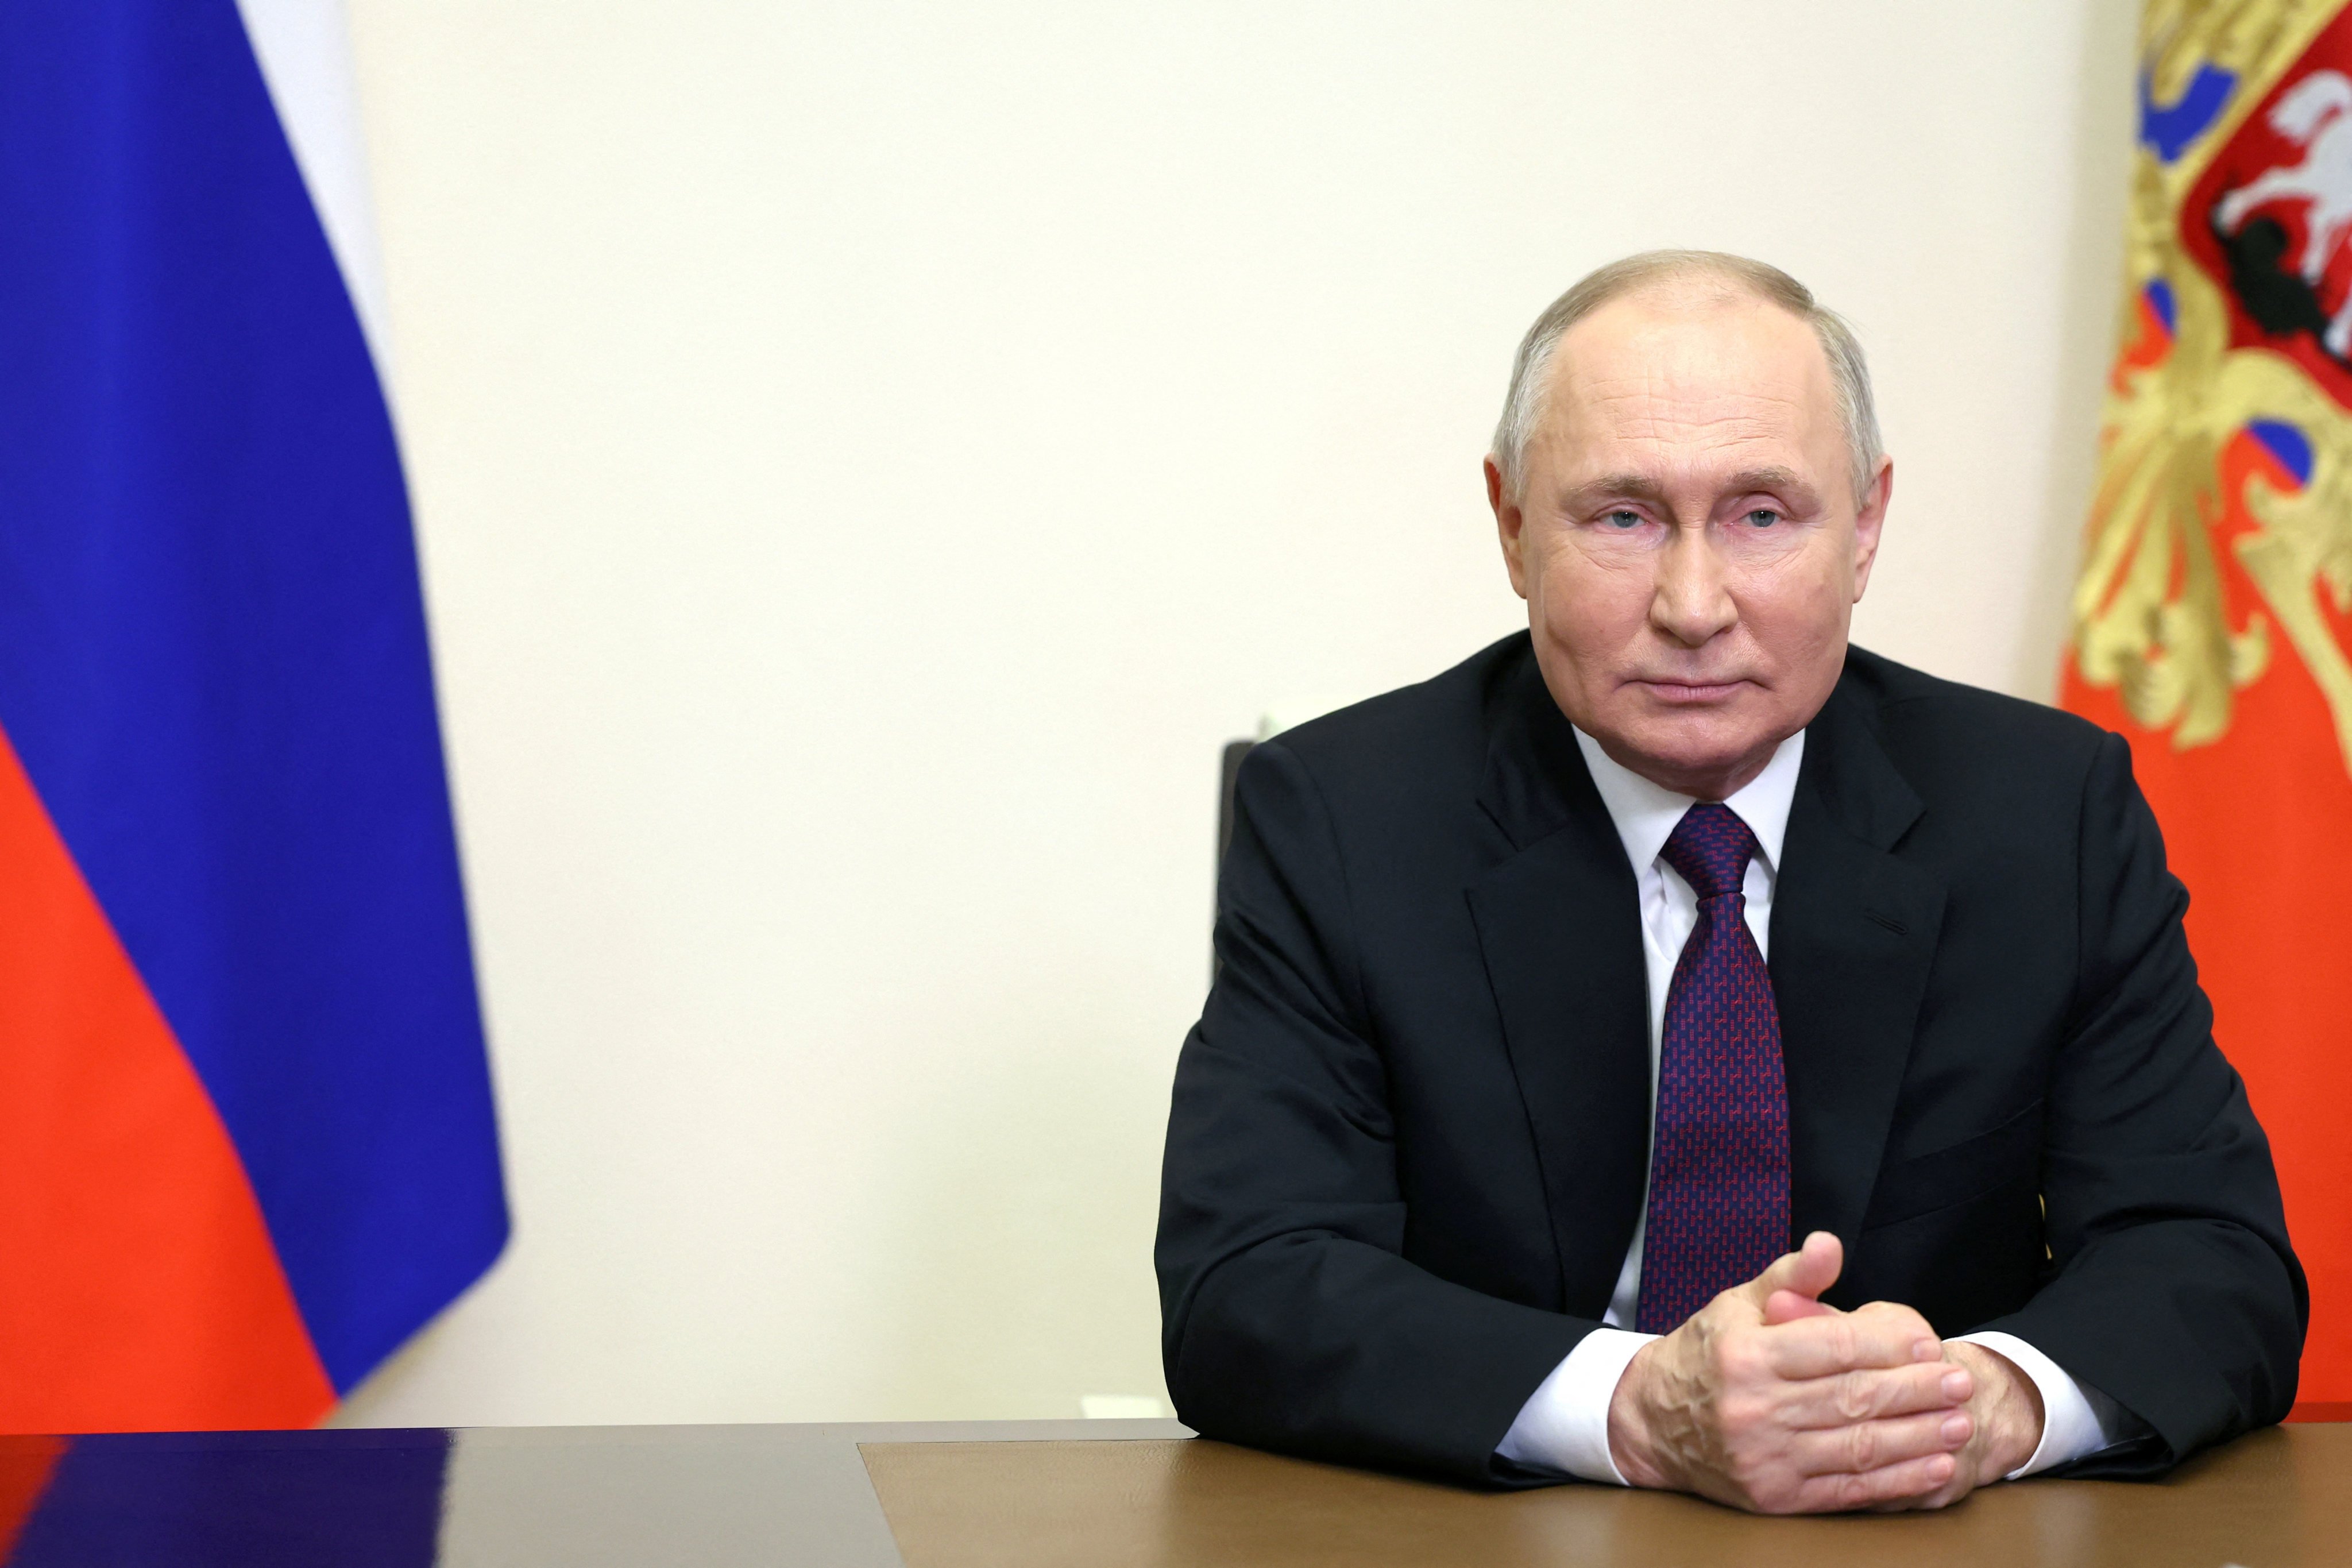 Russian President Vladimir Putin has ordered foreign companies leaving the Russian market to sell their assets for half of their value and to pay a portion of the proceeds to the state. Photo: via Reuters